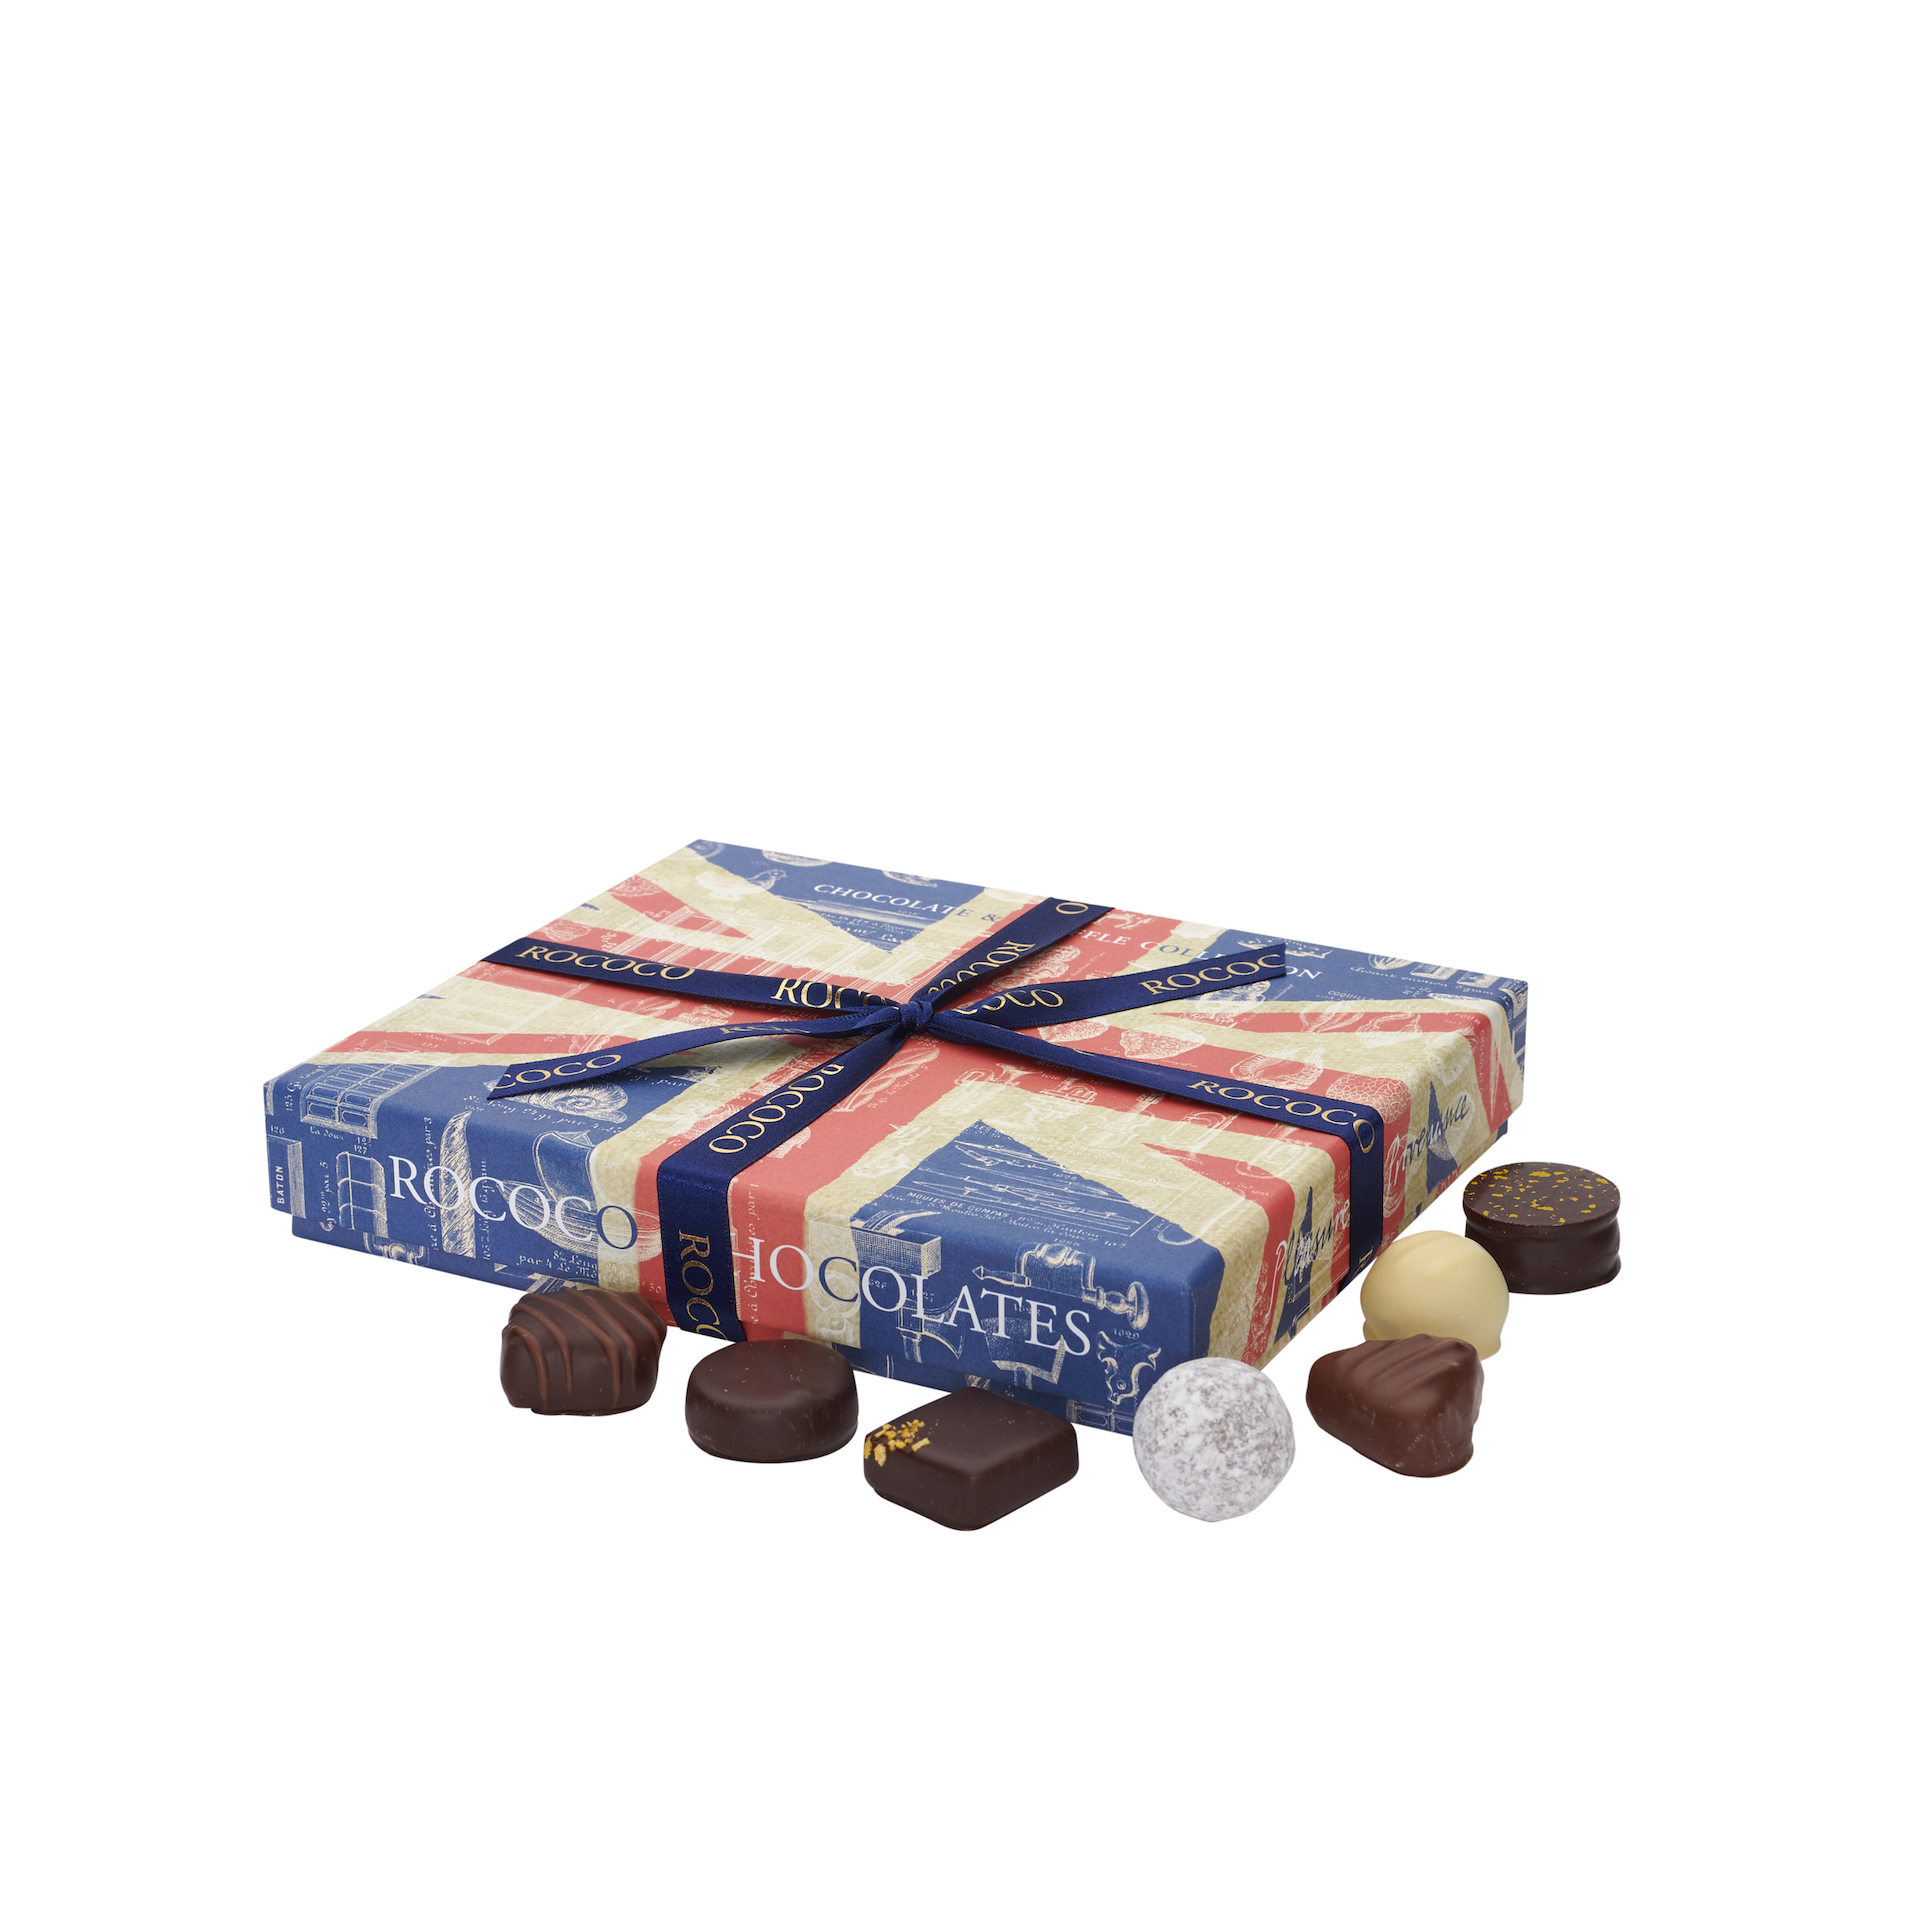 Rococo Chocolates Union Jack Chocolate and Truffle Collection - Large